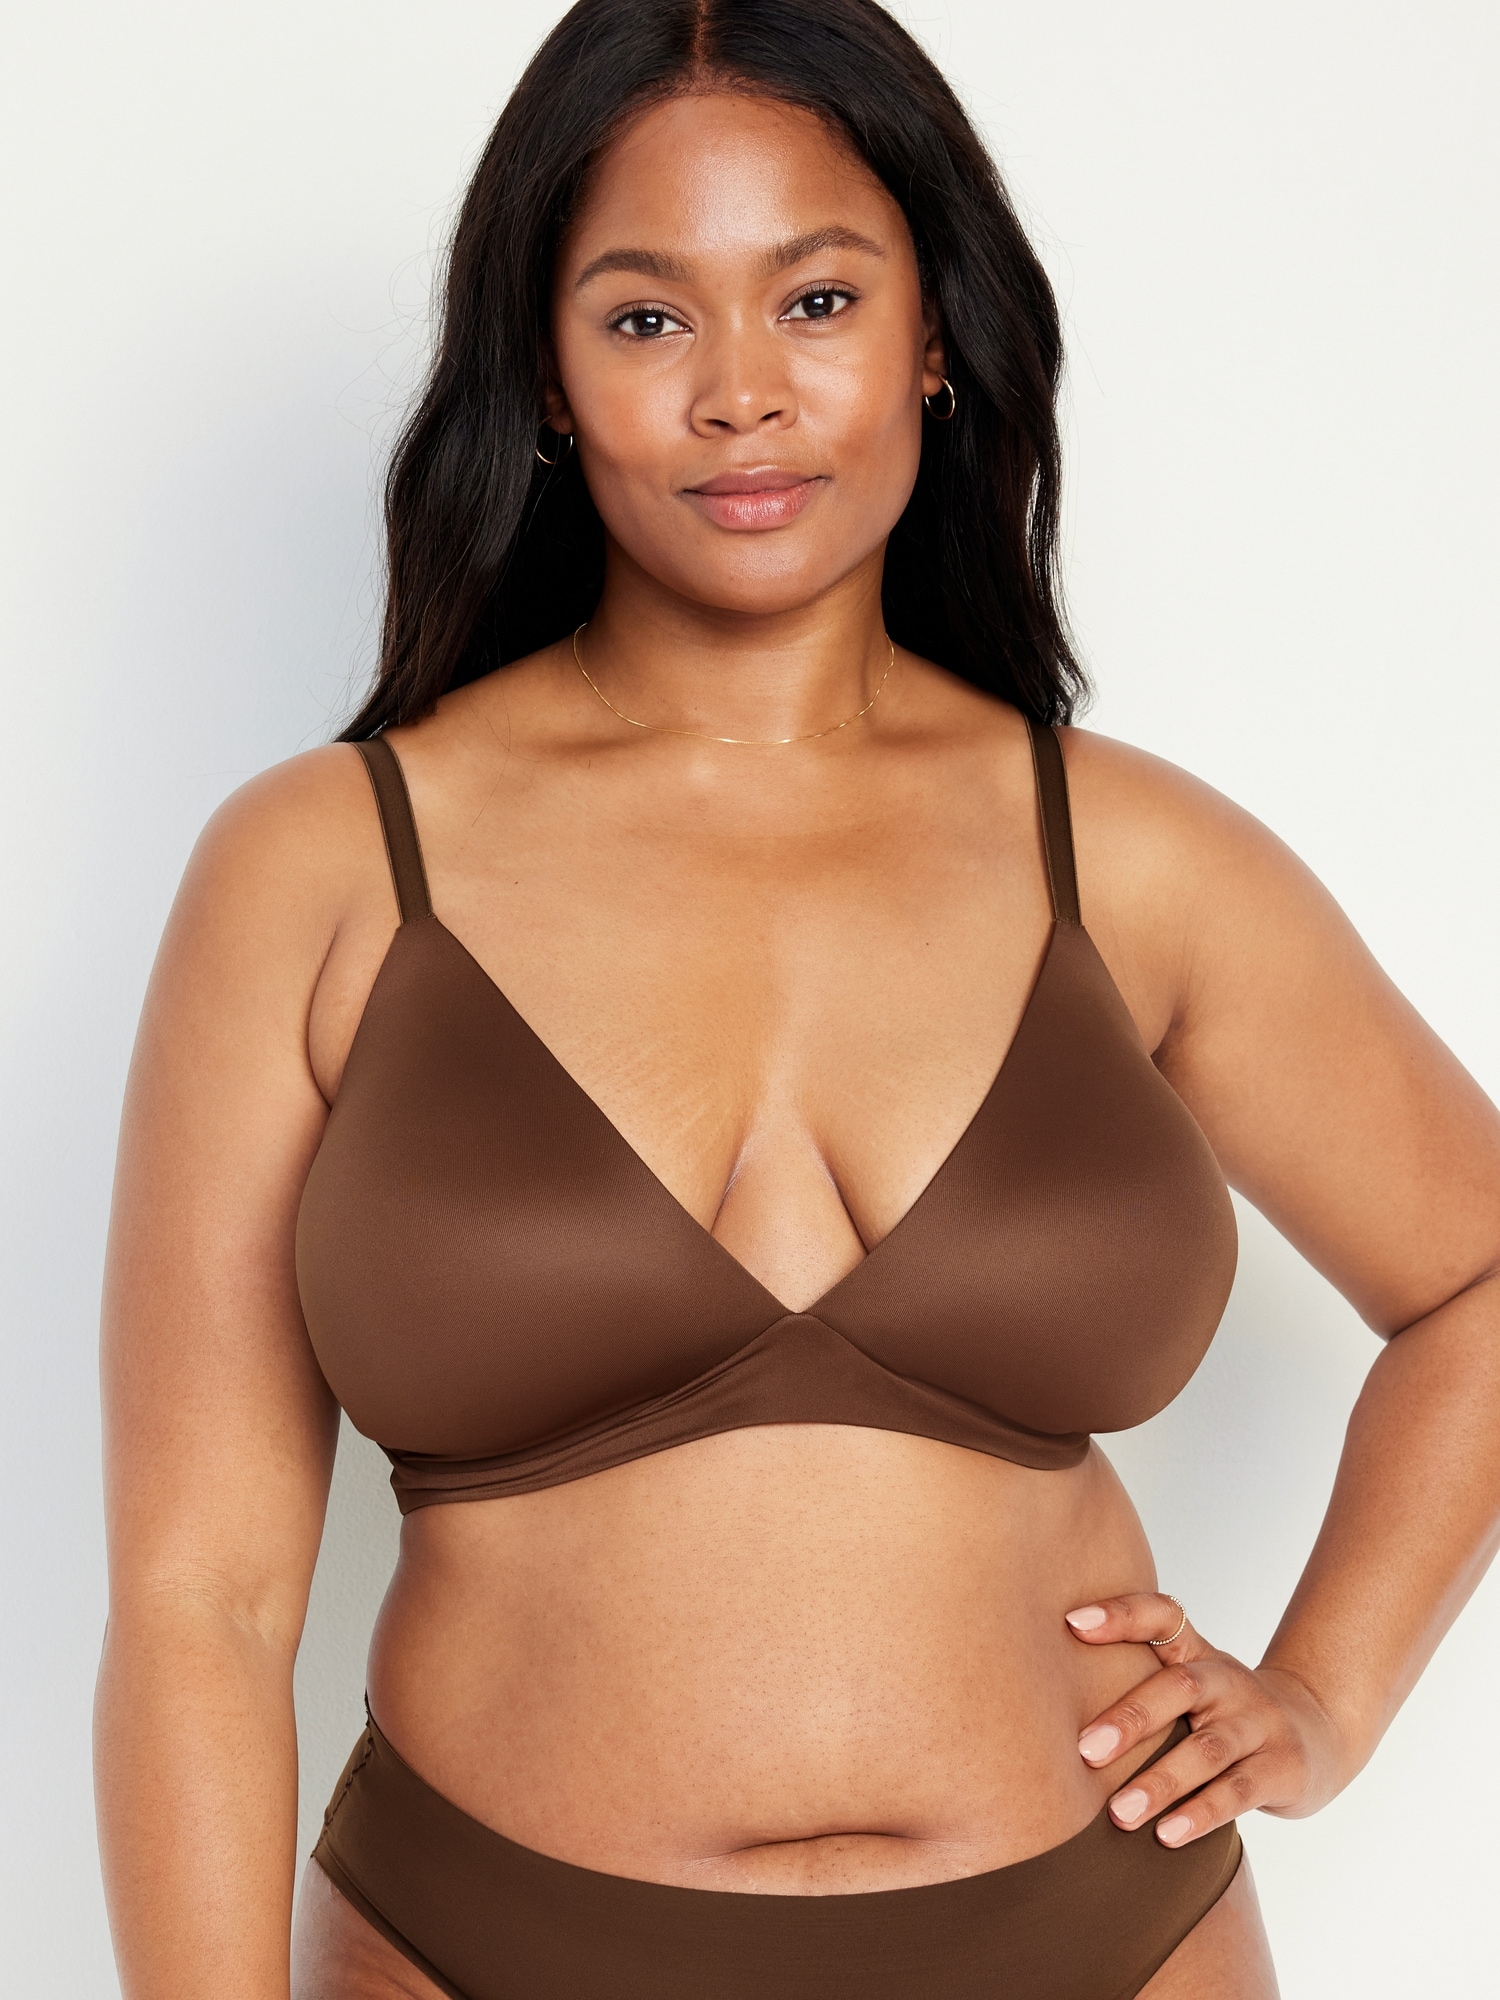 Women's bra sizes have skyrocketed in the last 60 years - see how